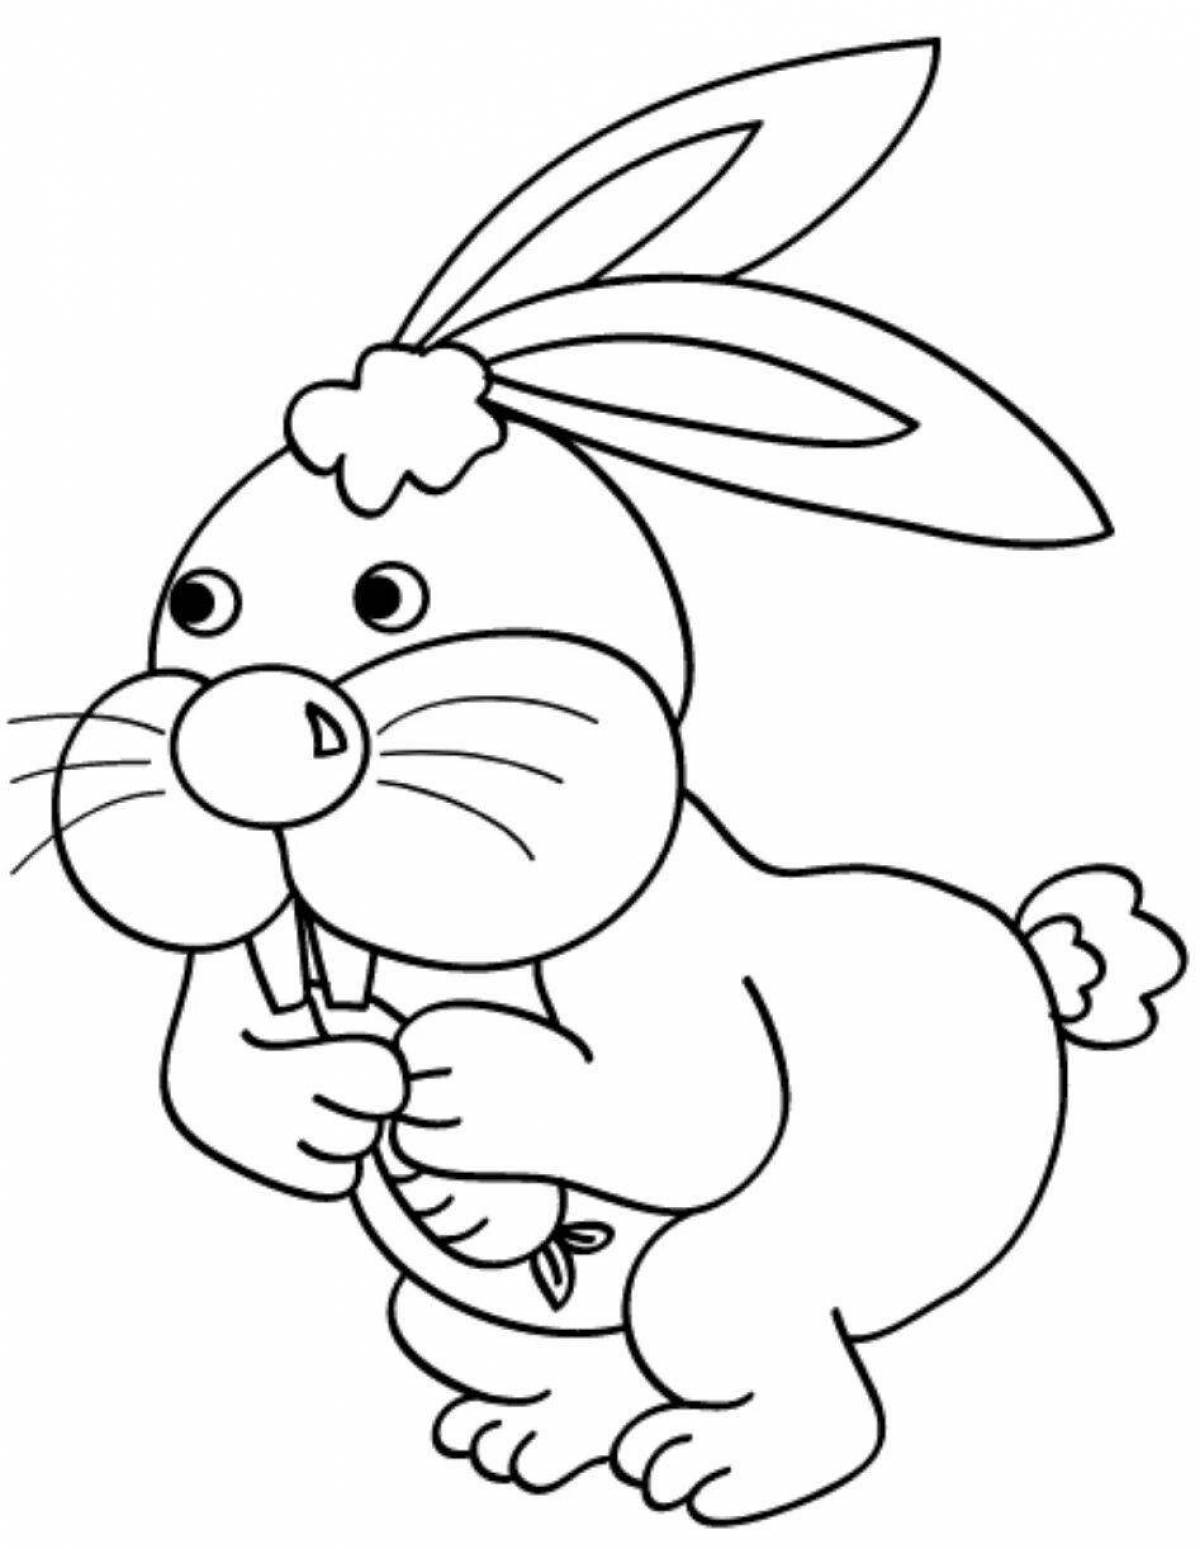 Cute bunny coloring book for 2 year olds